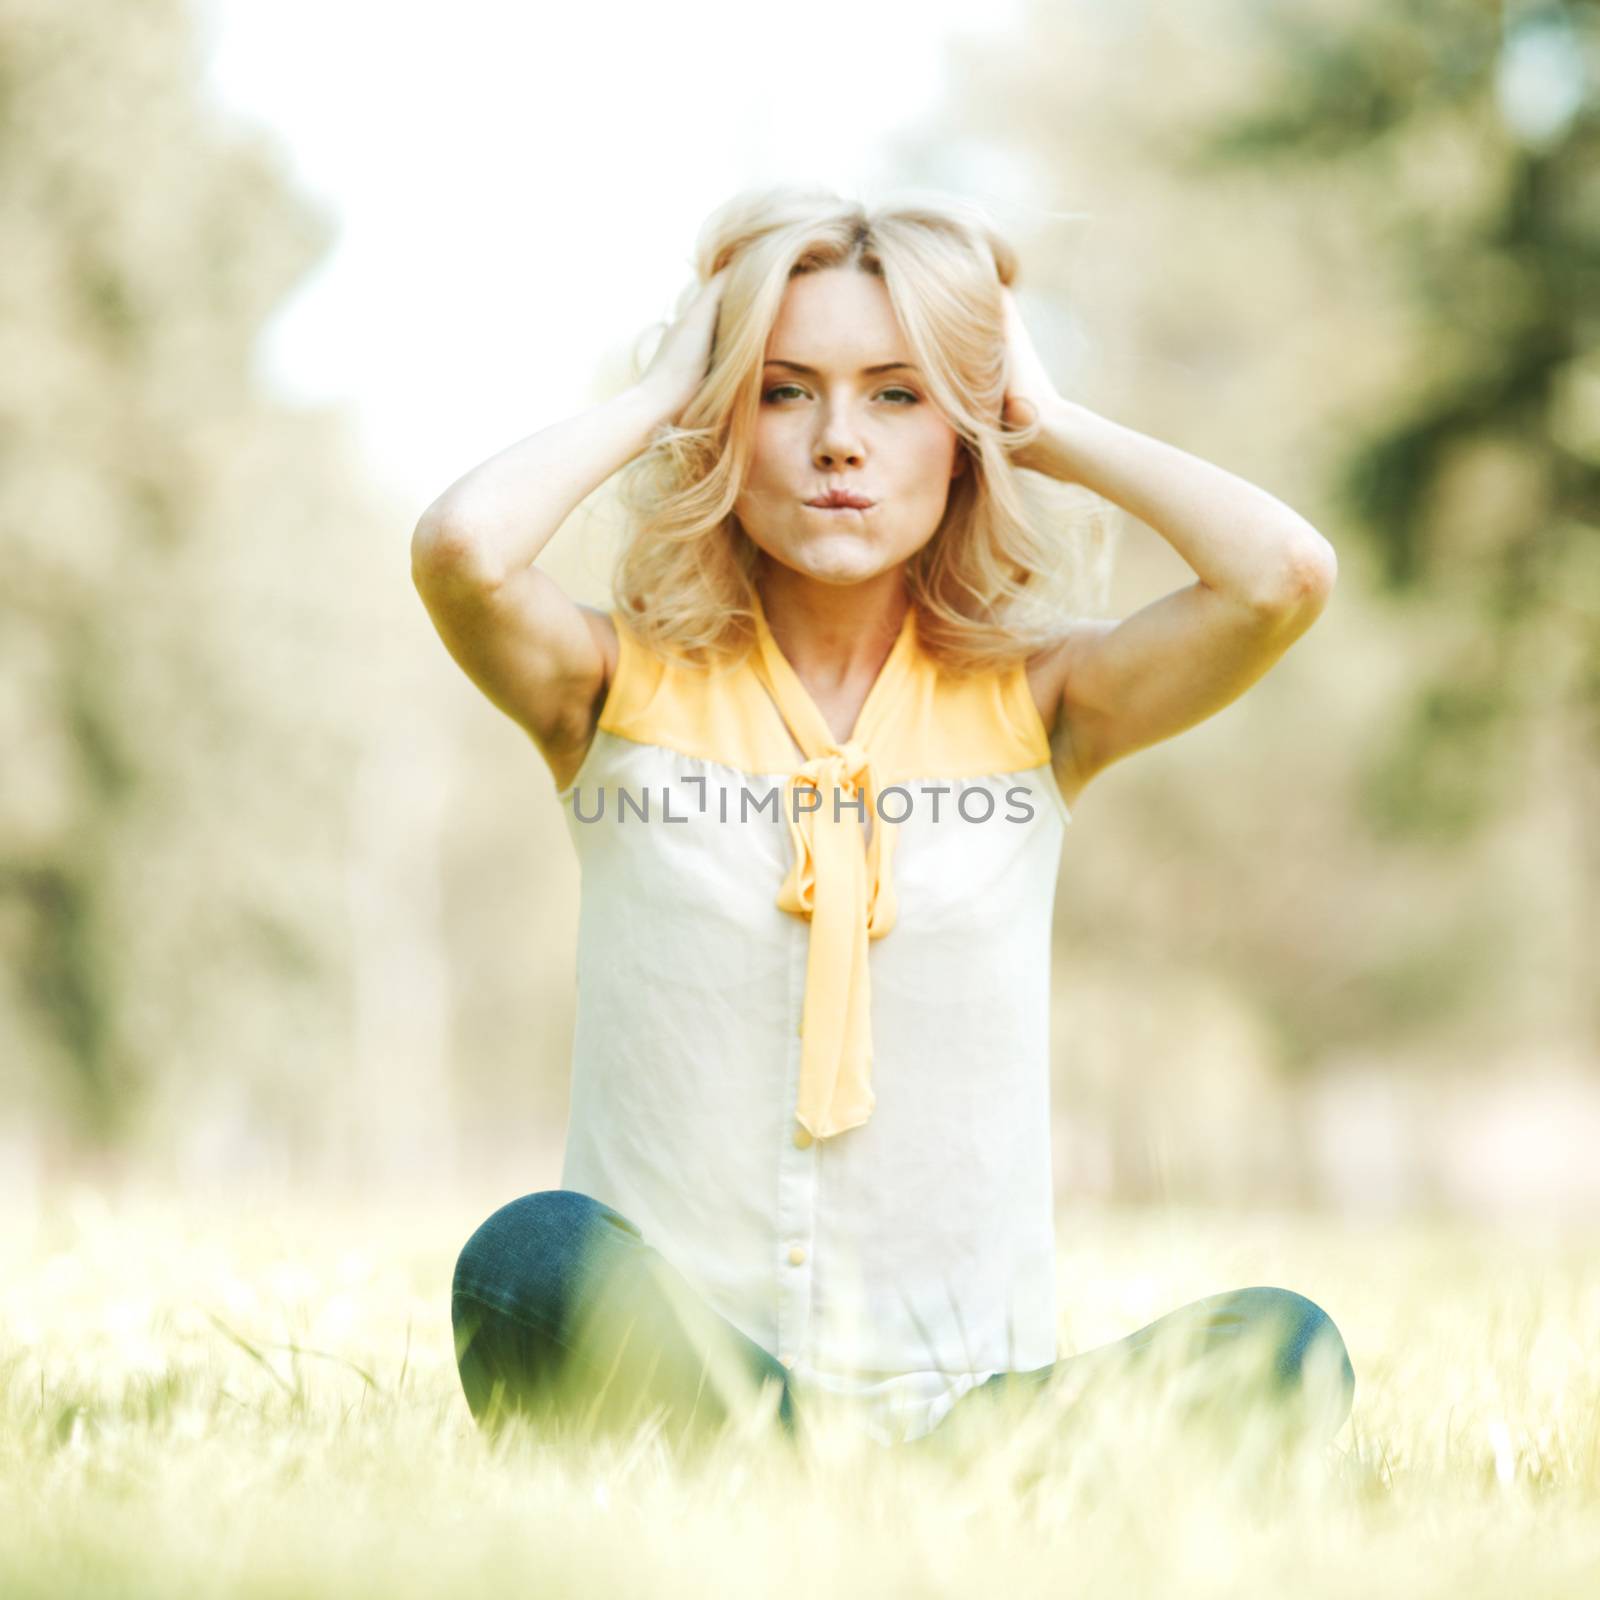 Beautiful happy young woman sitting on grass